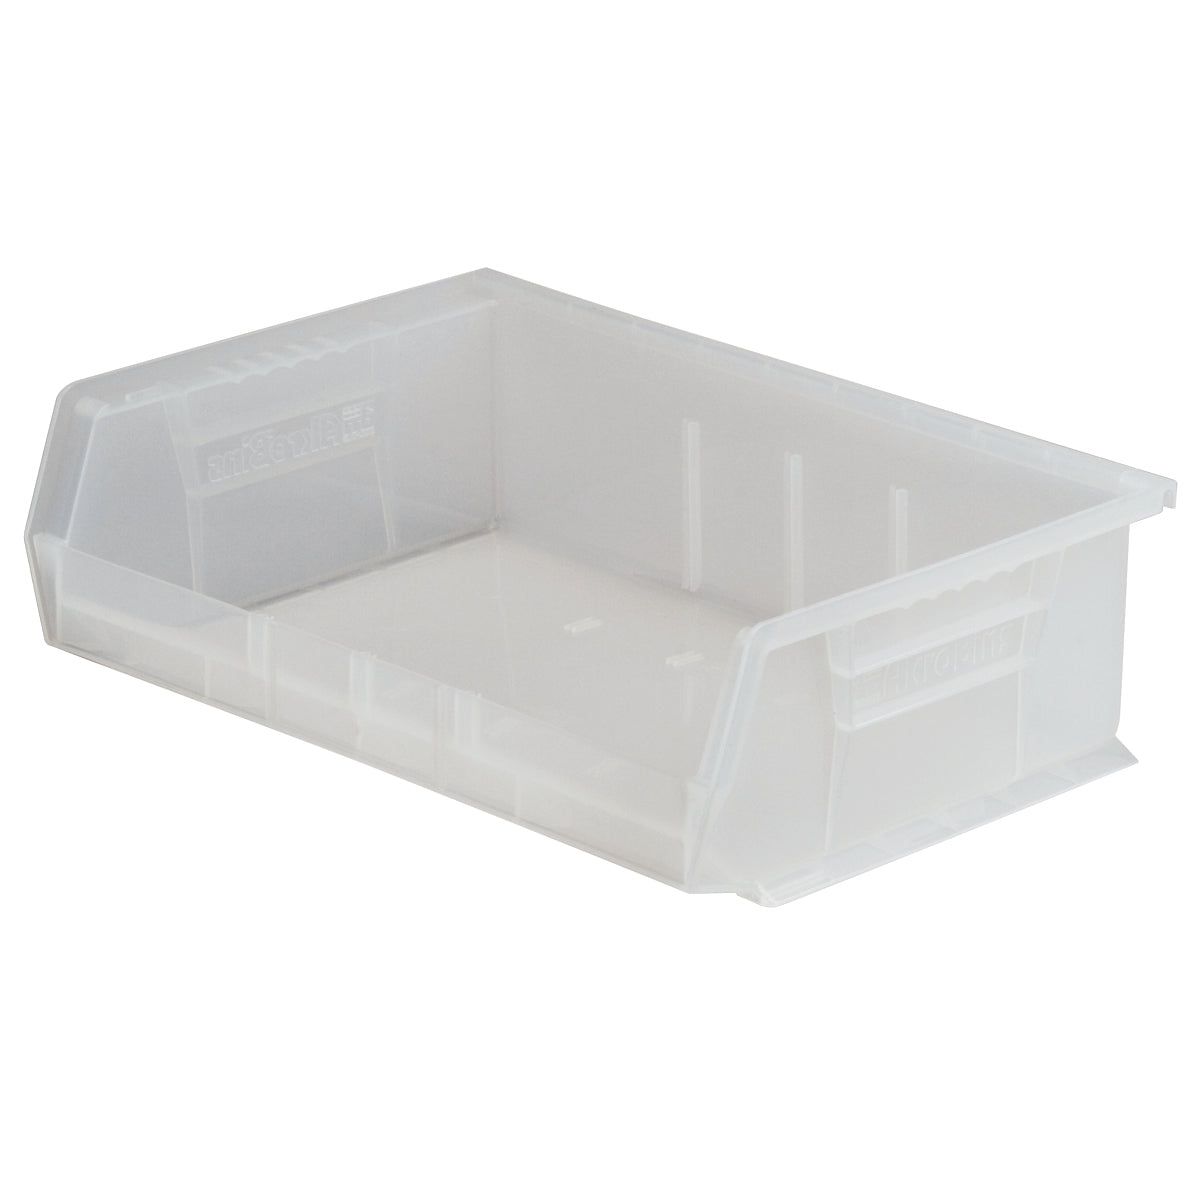 Akro-Mils (6 Pack) 30255 Plastic Stackable Storage AkroBin Hanging Container